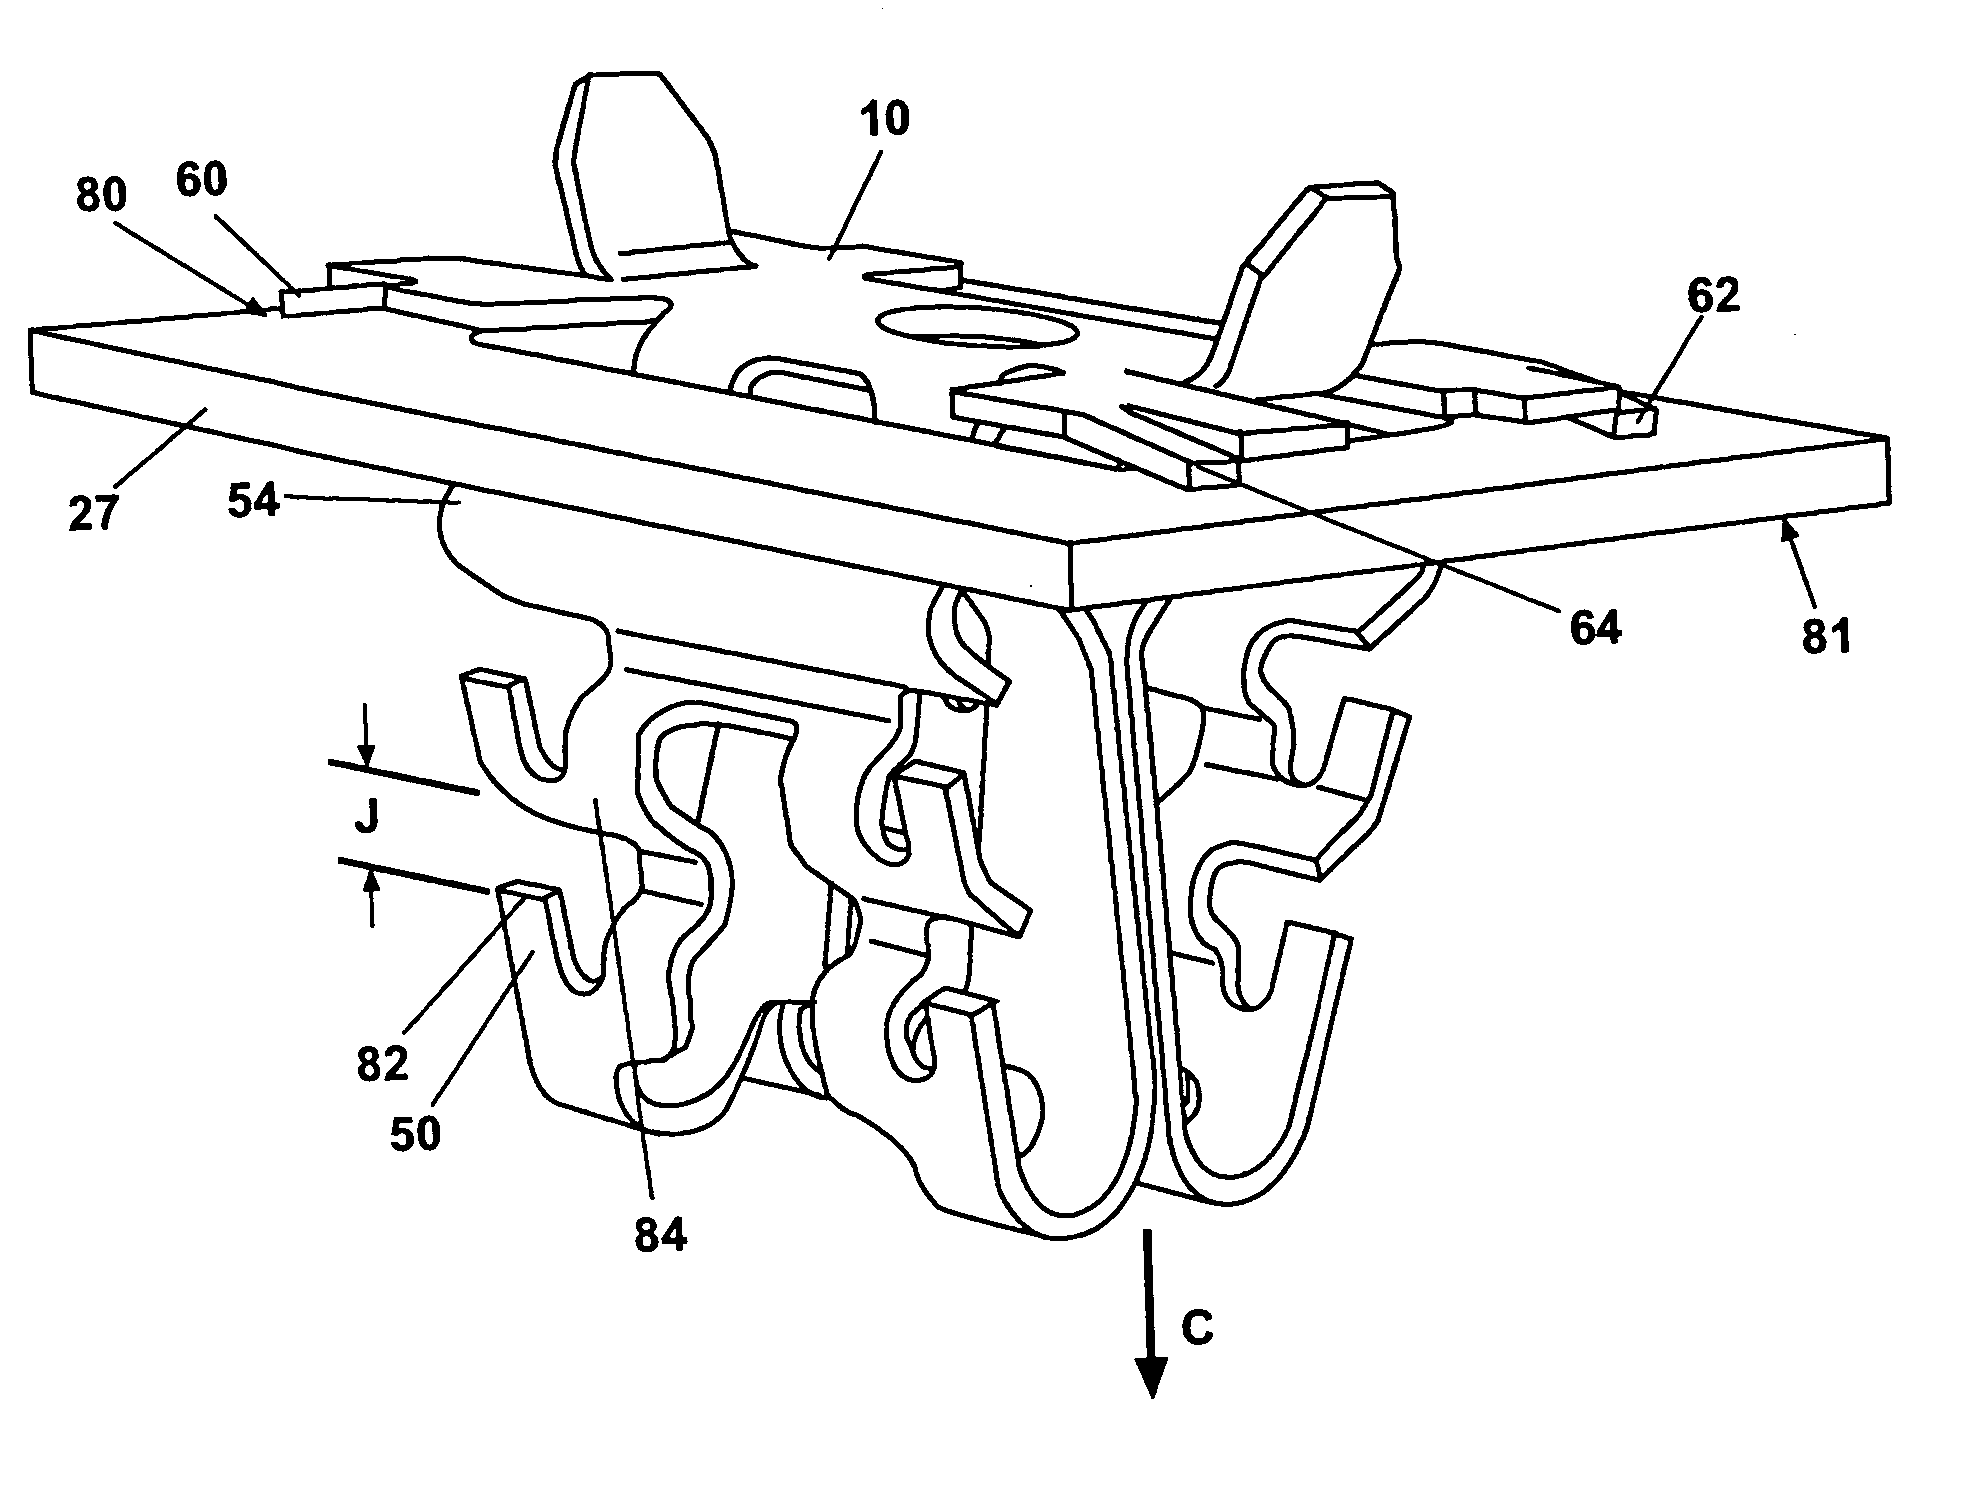 Multiple stage assembly assist fastener